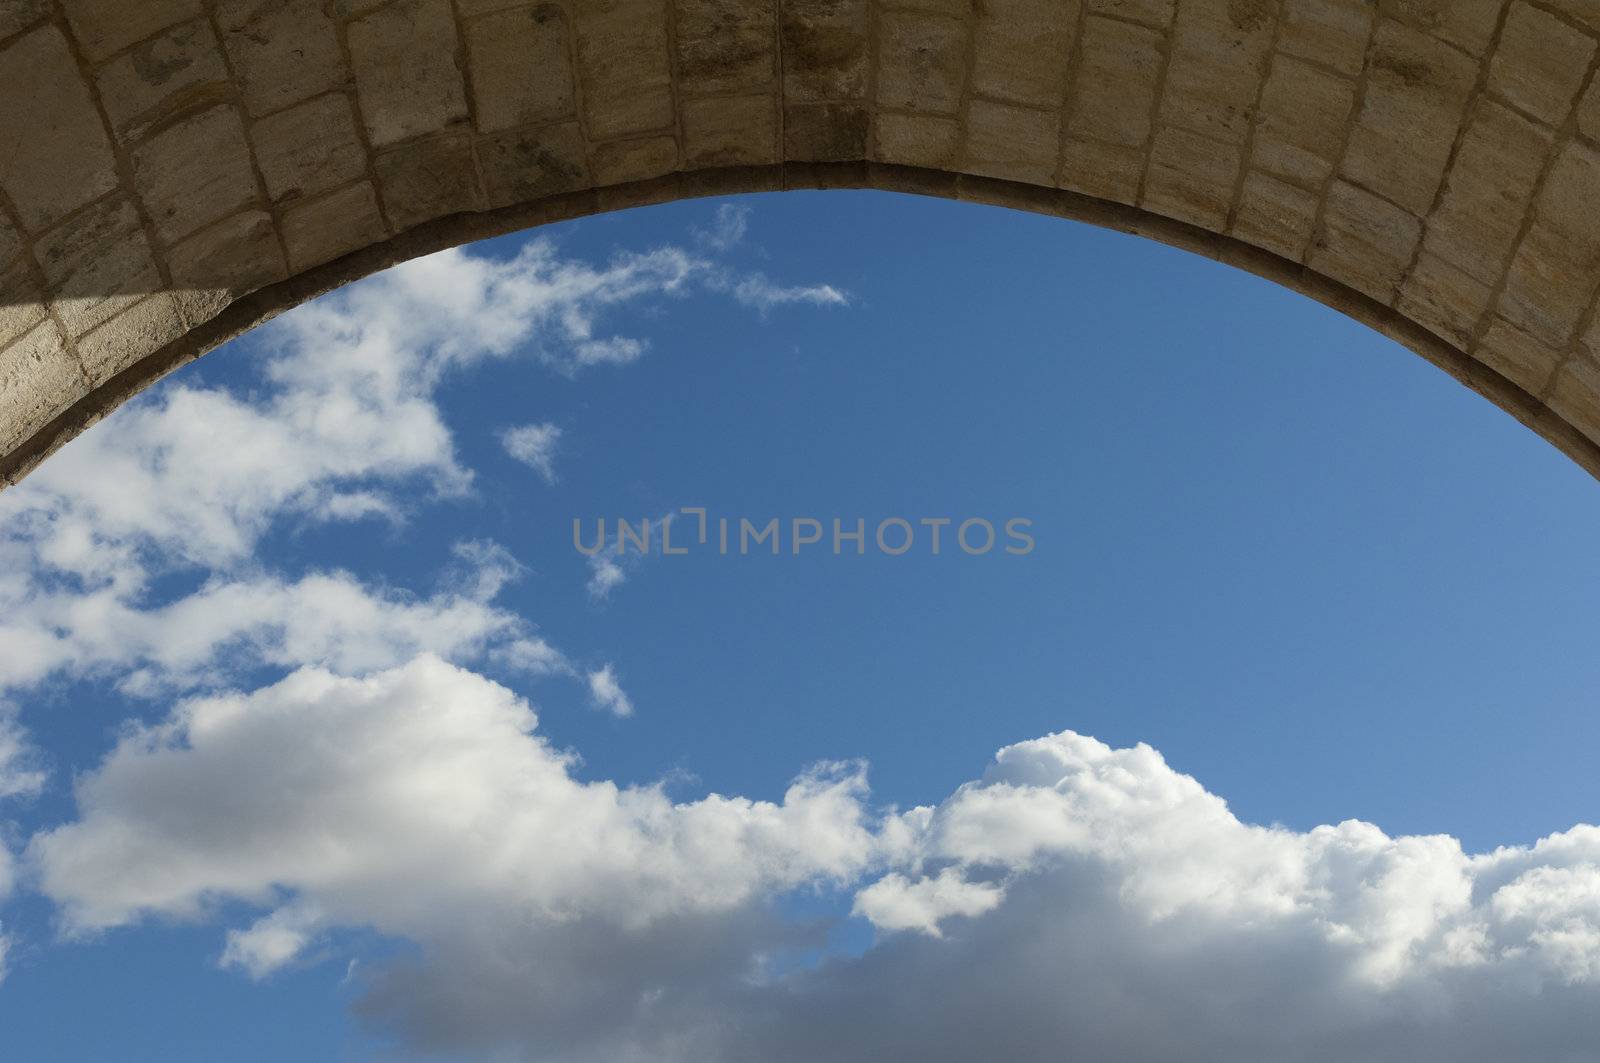 View of the sky with clouds through an old stone archway